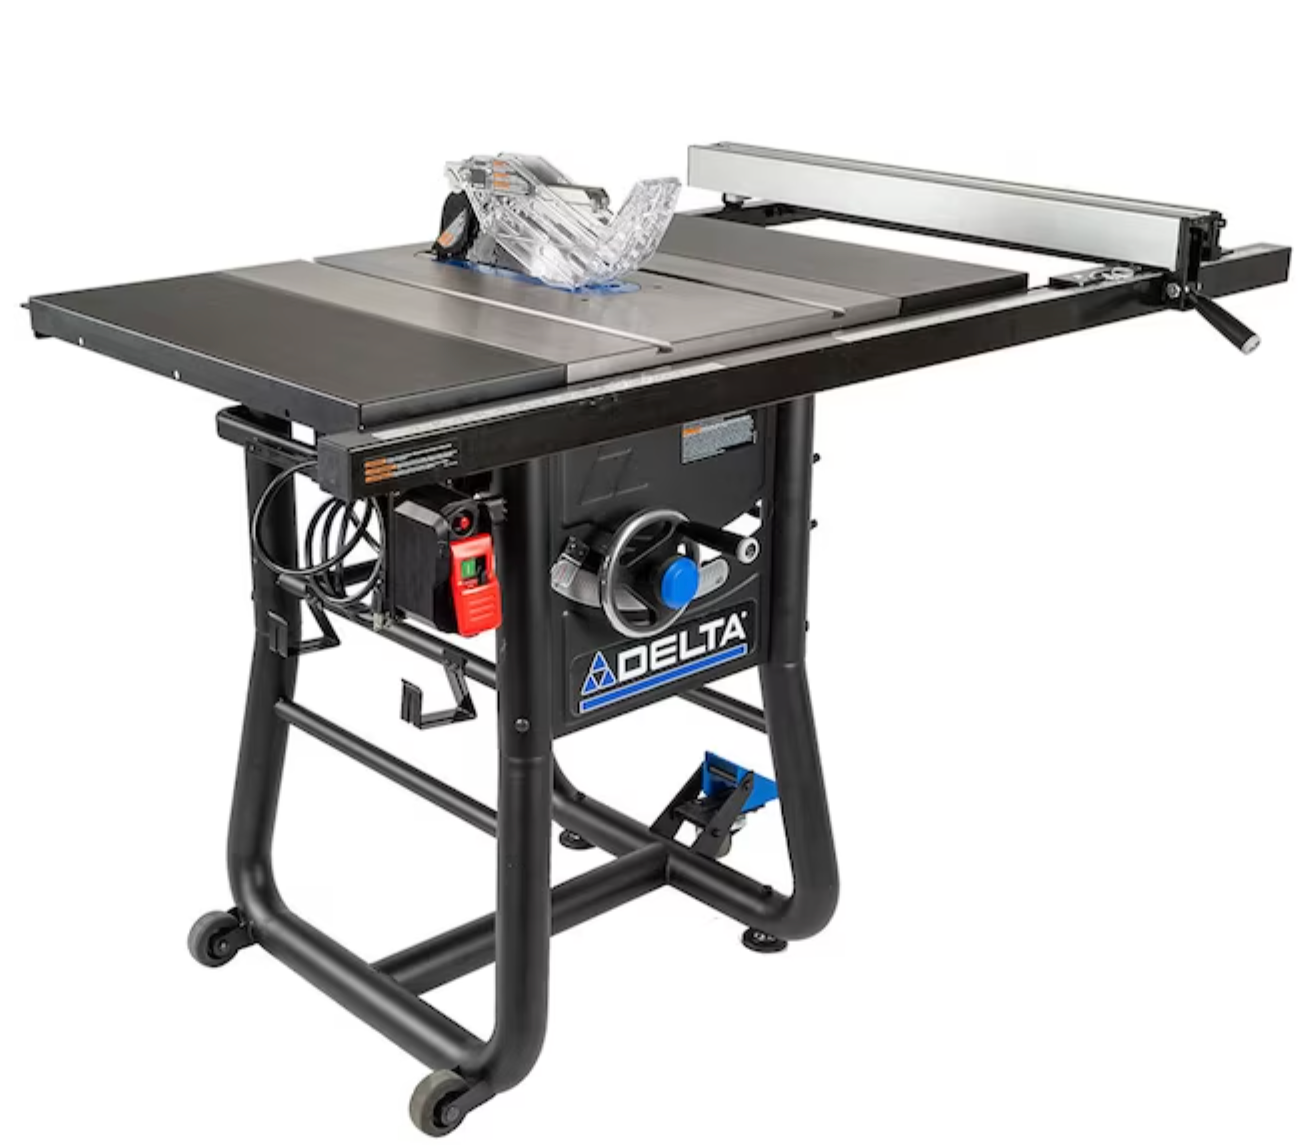 Contractor saws 10-in 15-Amp 120-Volt Corded Contractor Table Saw